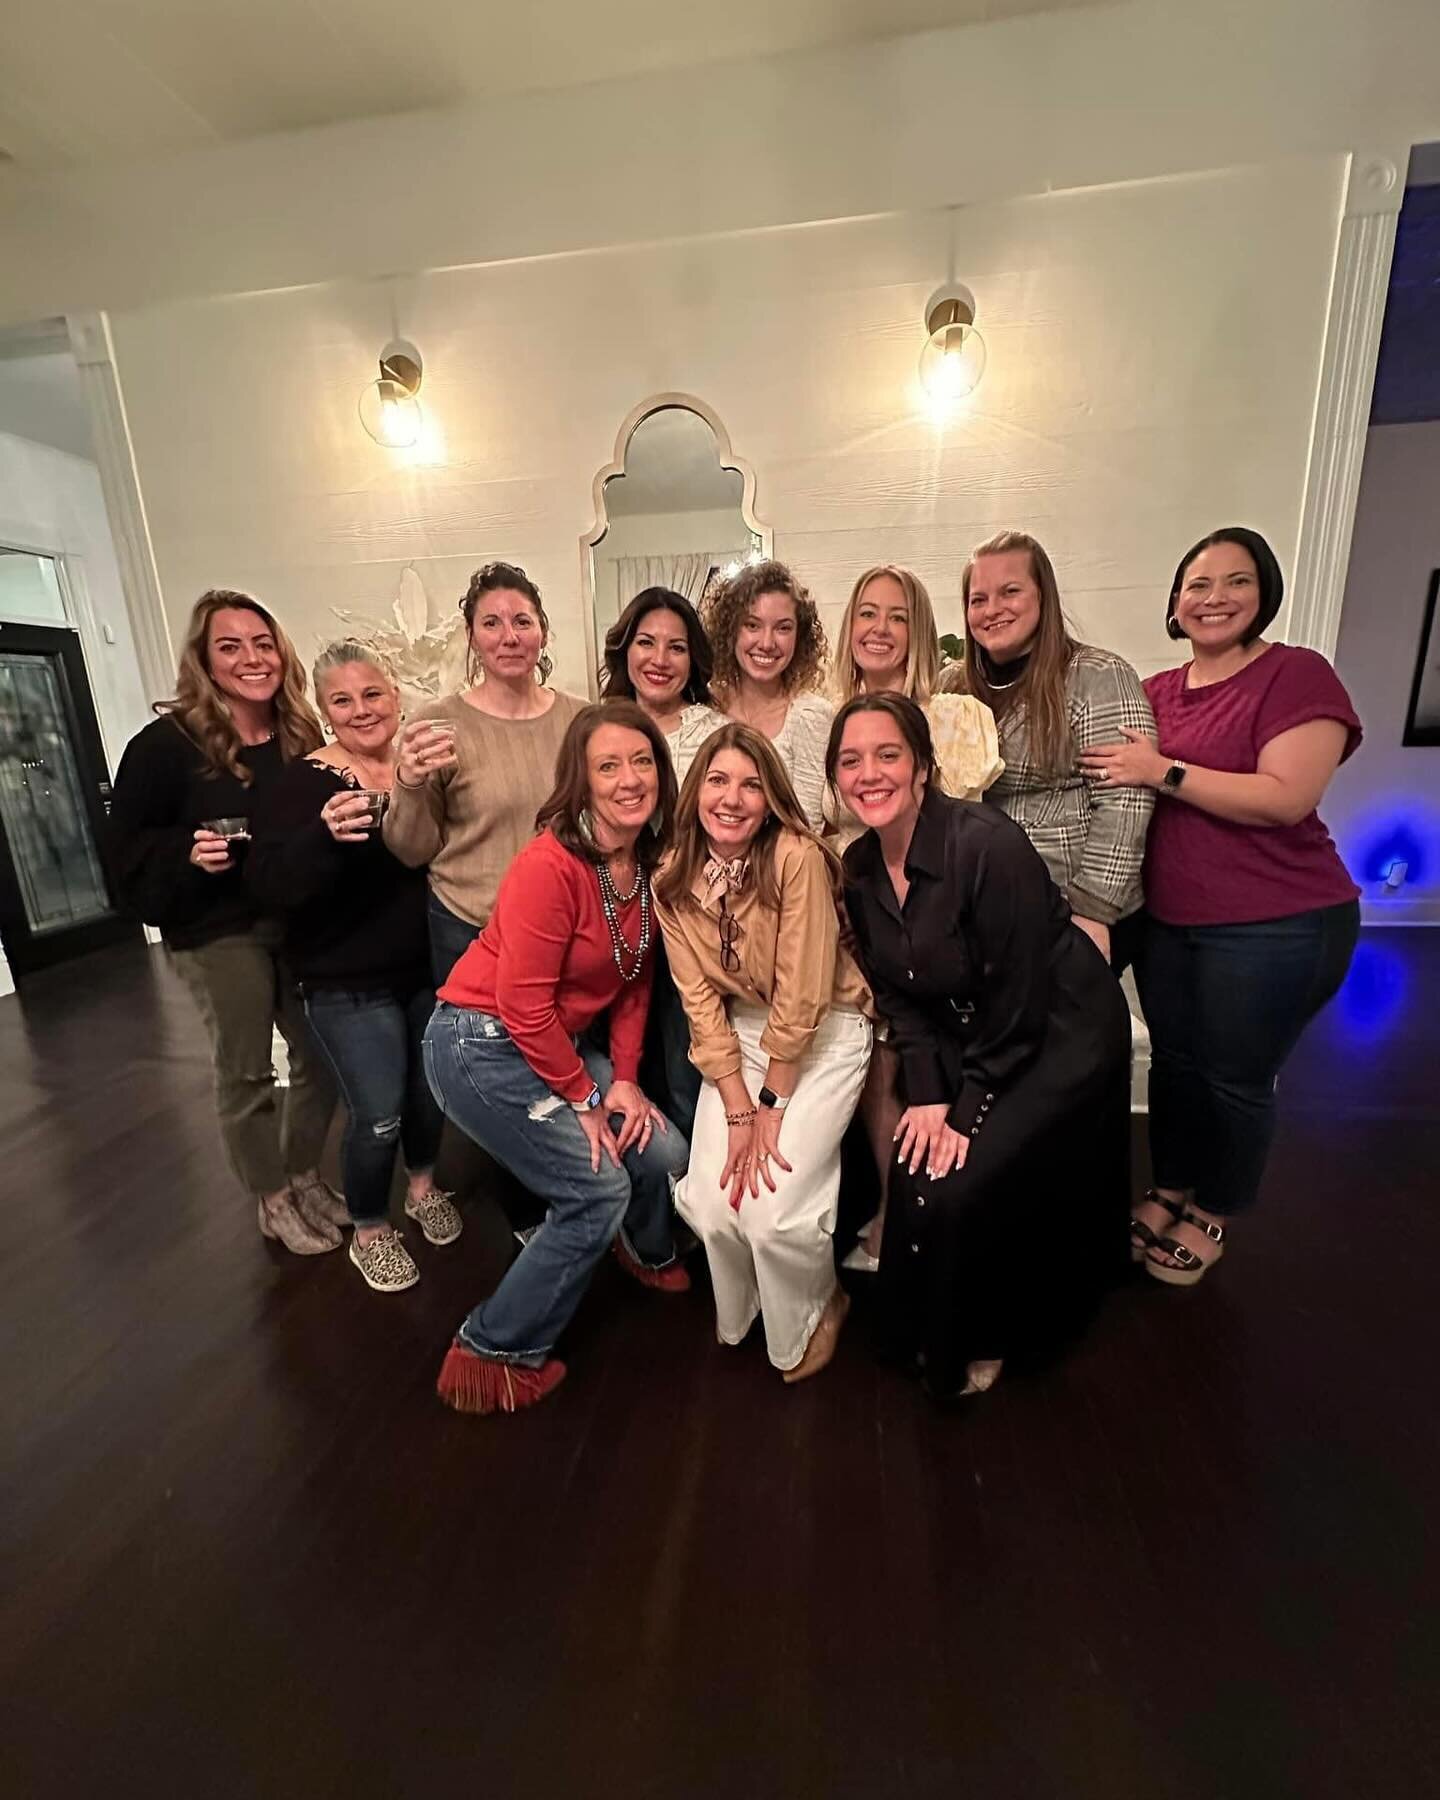 Such a wonderful experience at the recent event hosted by an amazing group of women! From the candlemaking class with Little Light Candle Co. to the delectable charcuterie bites by Sweet Home Charcuterie, it was an evening filled with fun and camarad